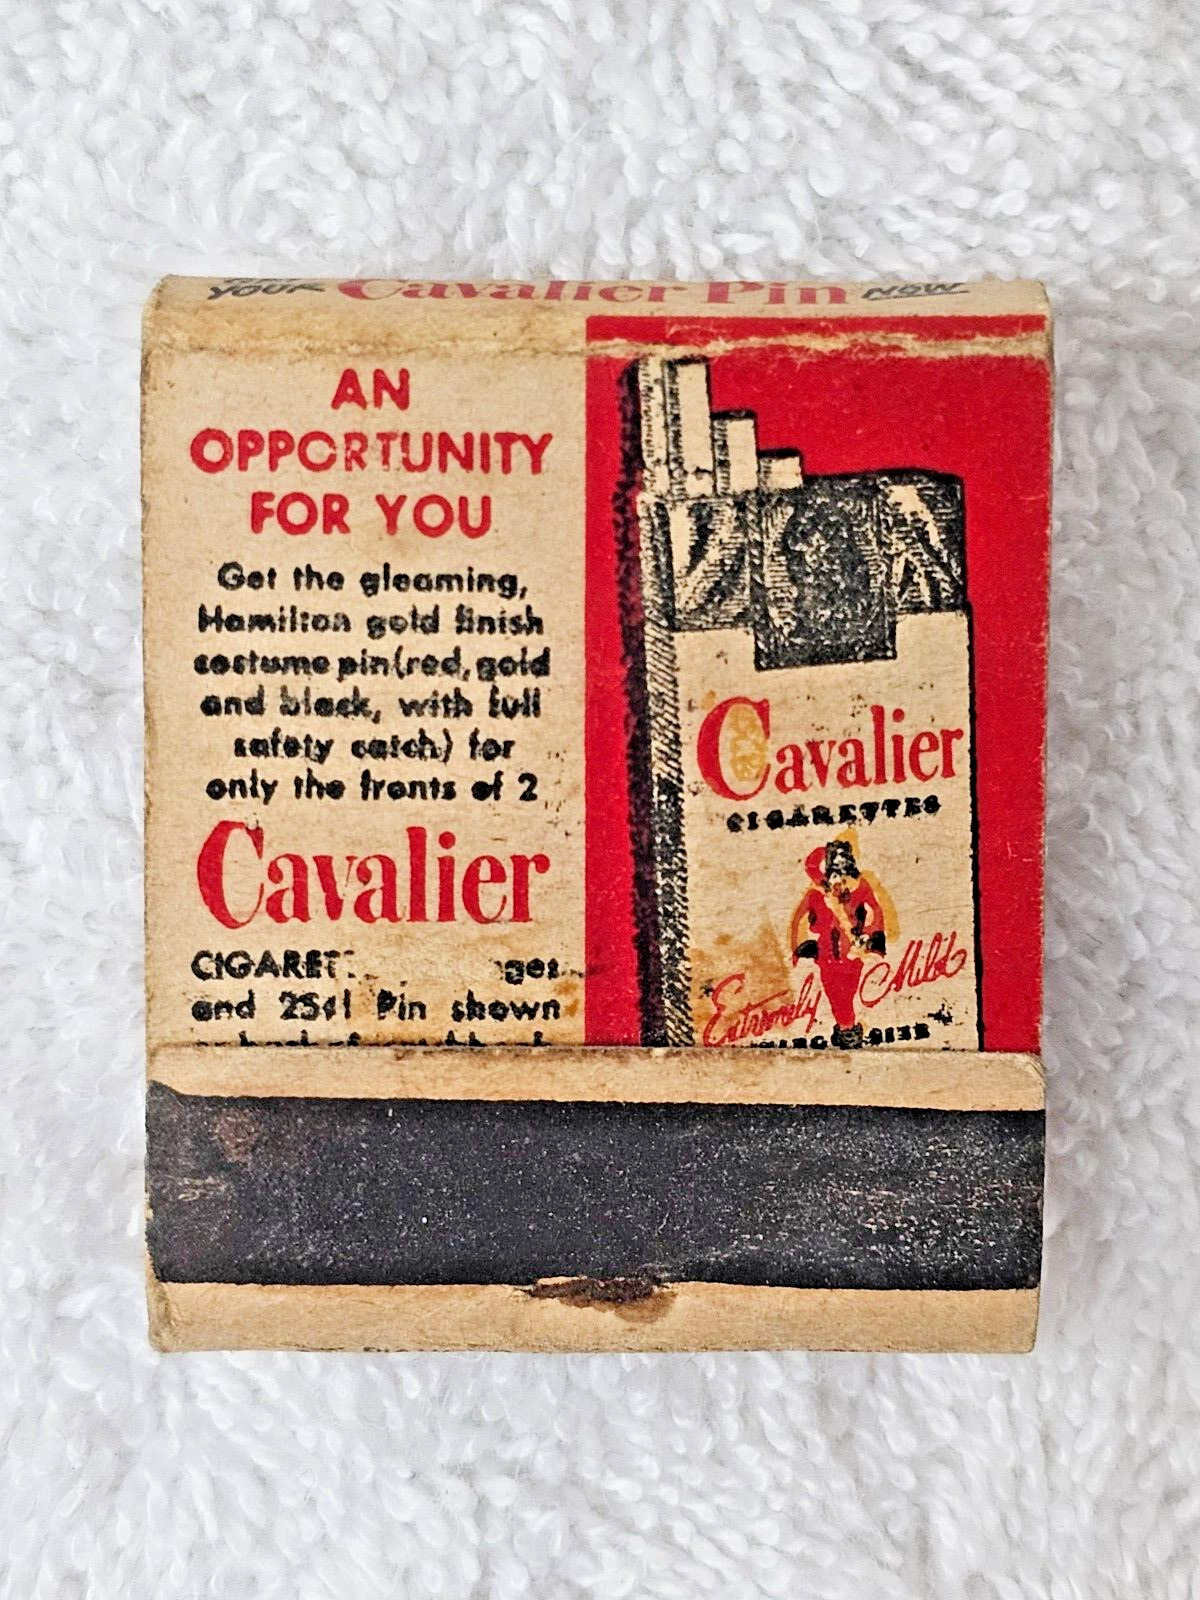 Cavalier Cigarettes Pin Matchbook Cover Tobacco 1940's Vintage No Matches